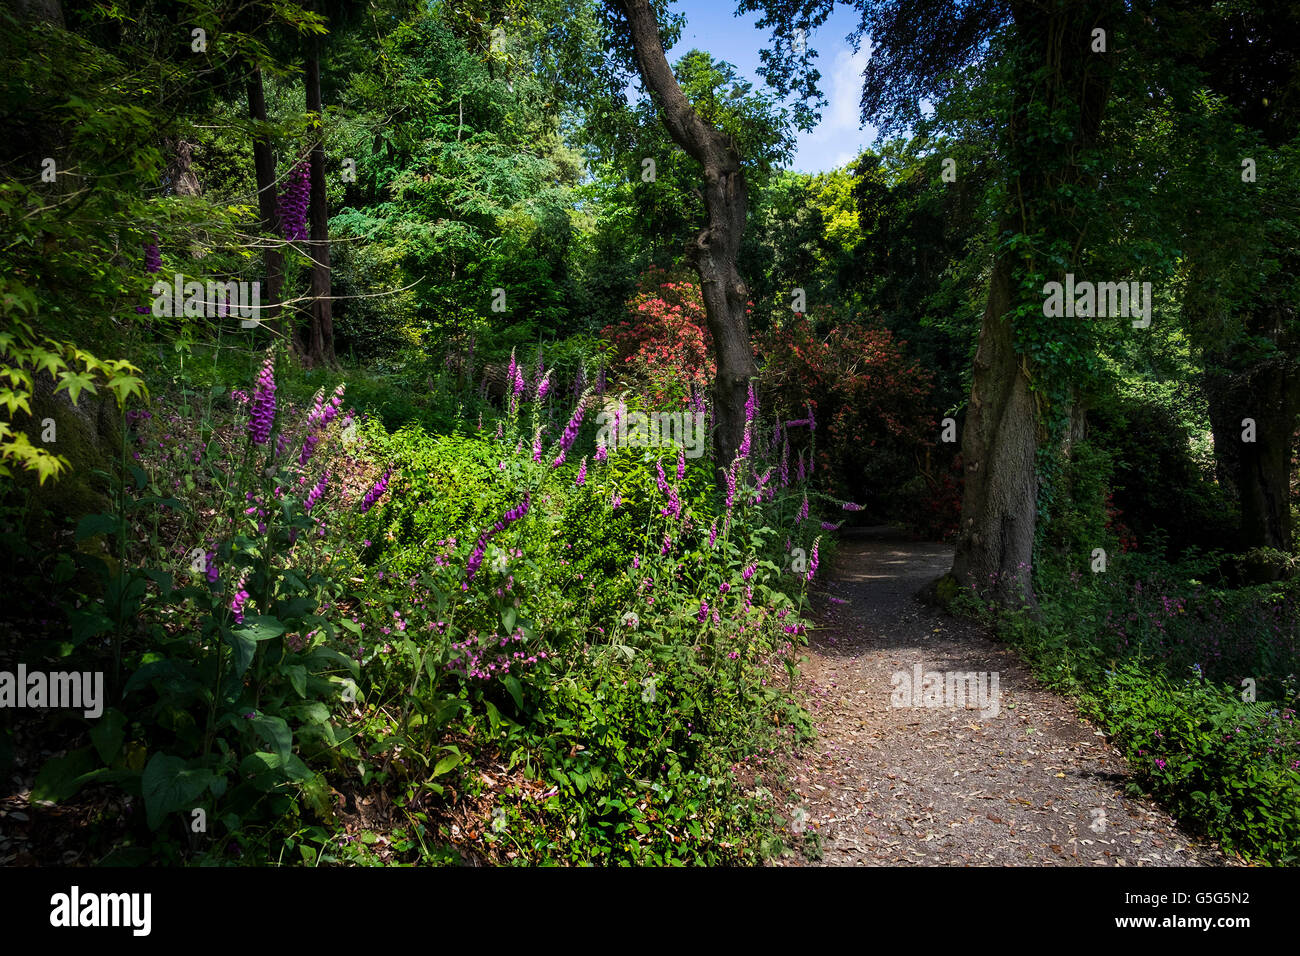 The picturesque sub-tropical Trebah Garden in Cornwall. Stock Photo